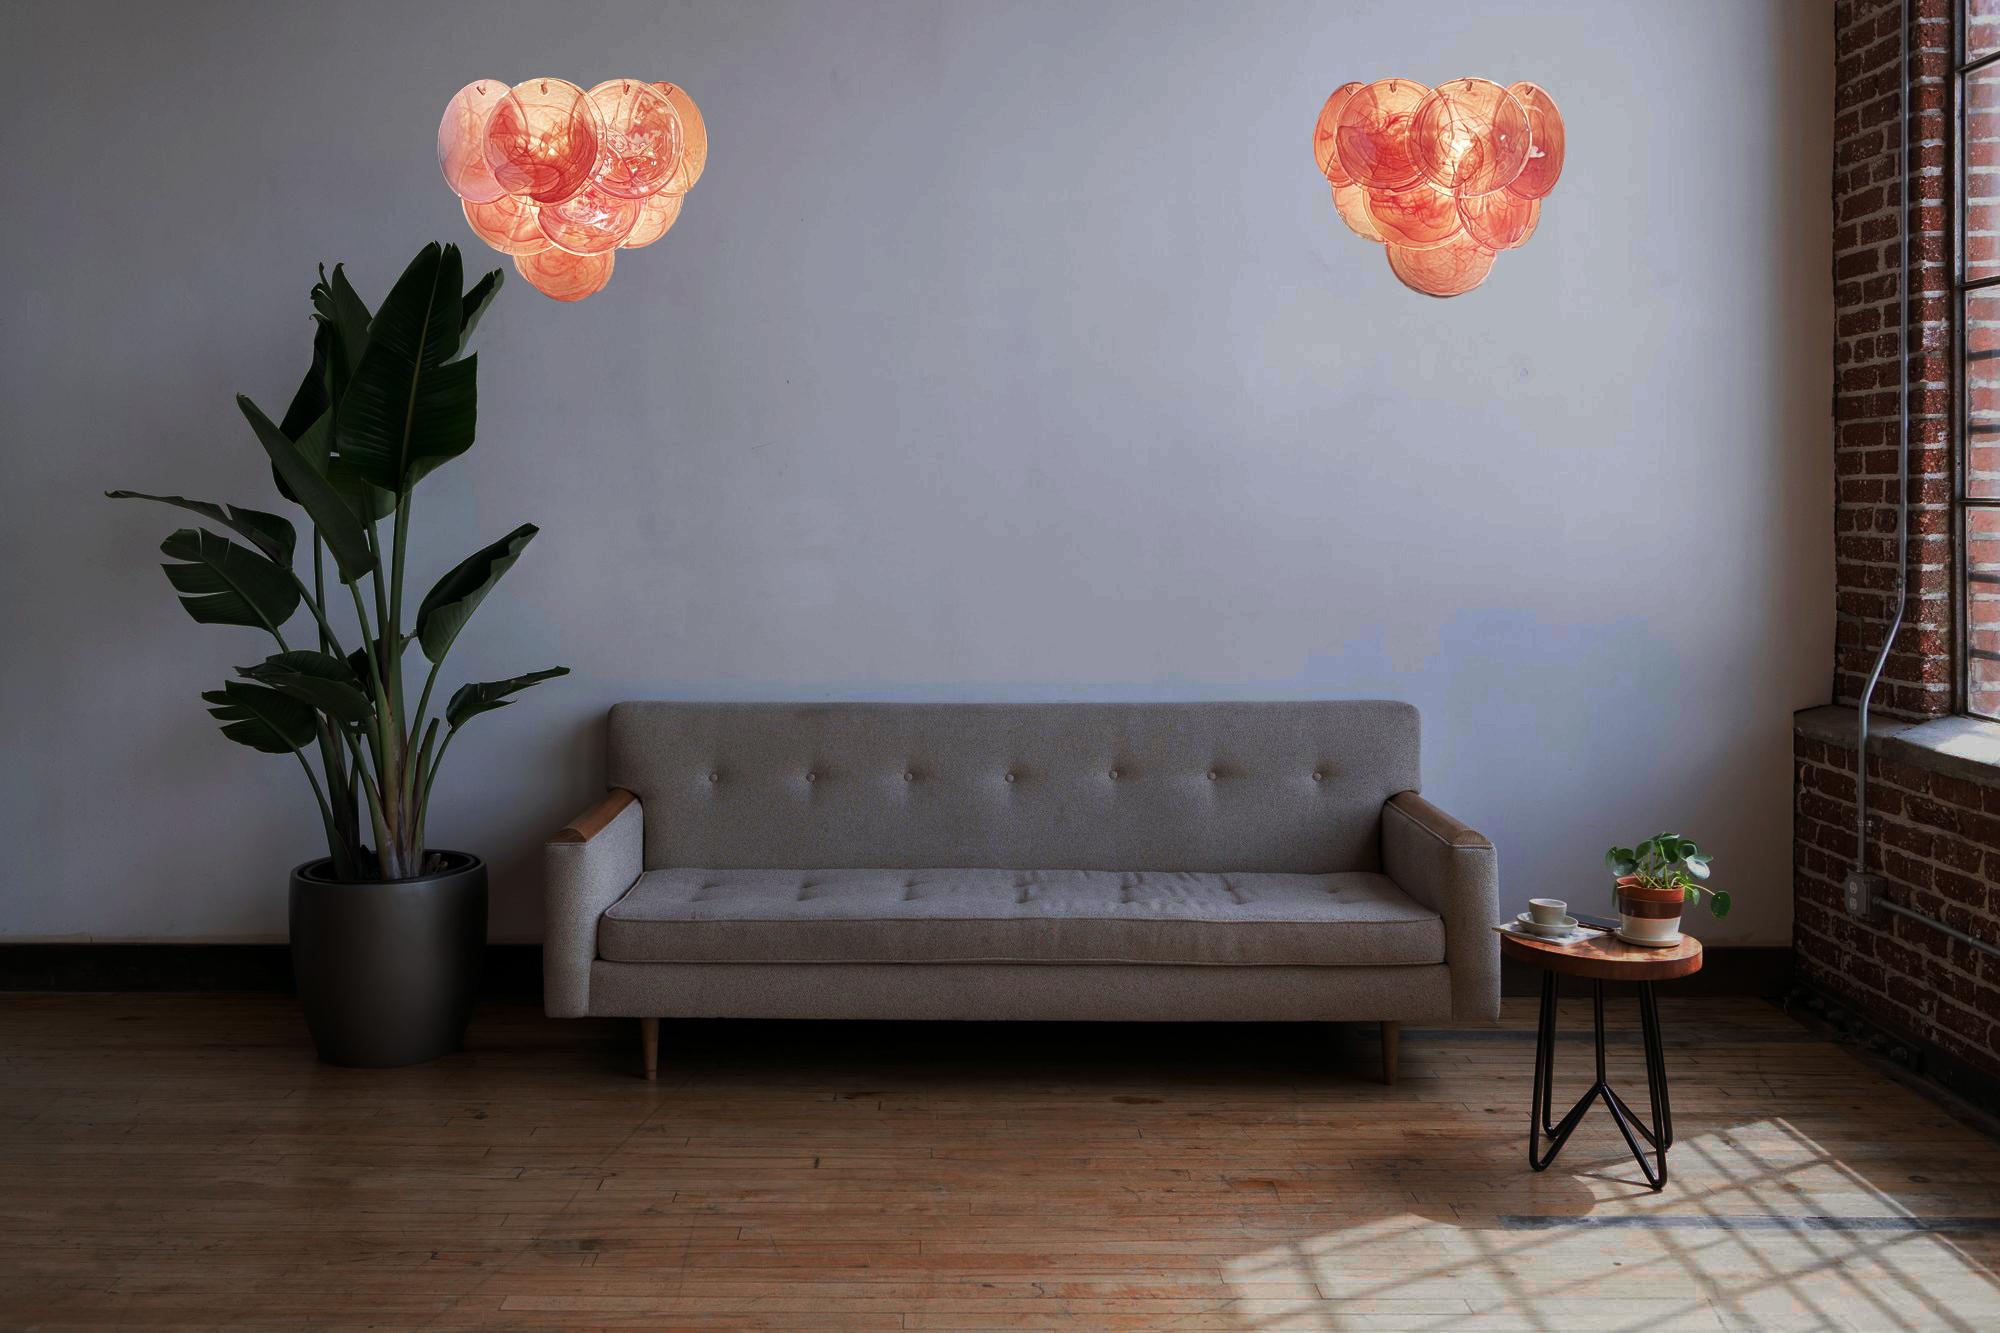 20th Century Beautiful Pair of glass wall sconces - 10 iridescent alabaster pink discs